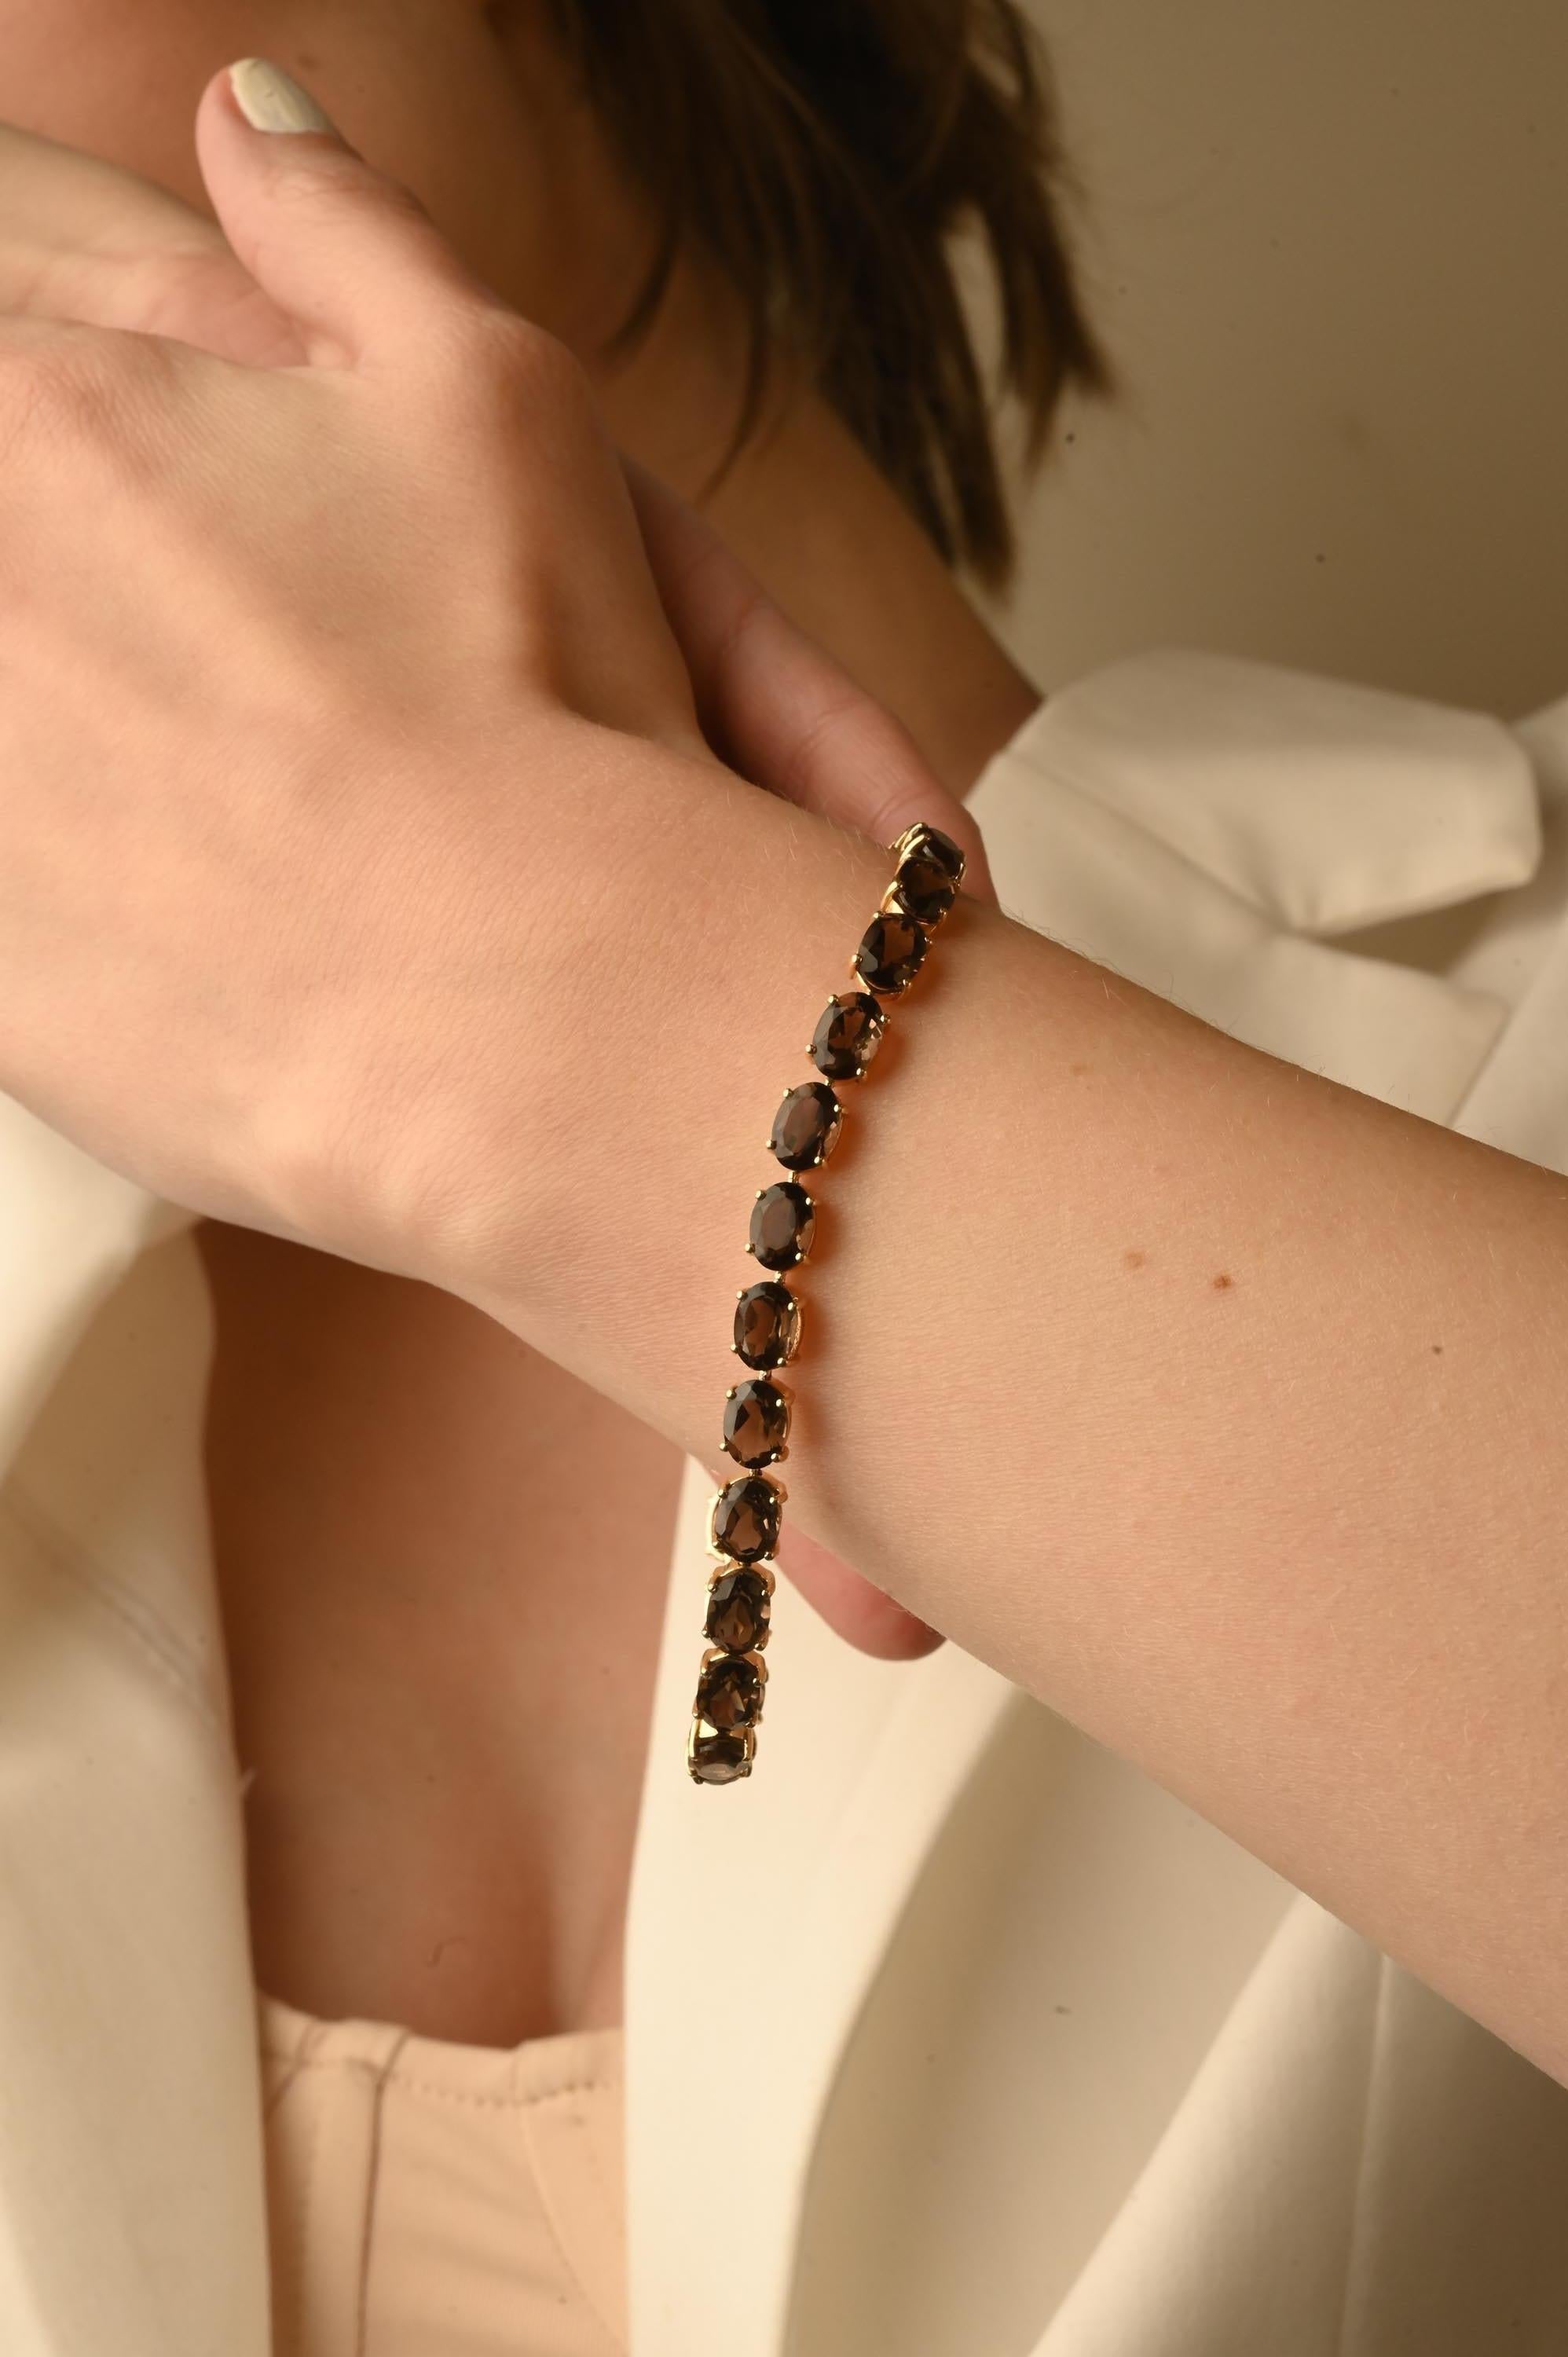 This Brown Quartz Tennis Bracelet in 14K gold showcases 25 endlessly sparkling natural smoky quartz, weighing 18.47 carat. It measures 8 inches long in length. 
Smoky quartz relieves stress and promotes positive thought. 
Designed with perfect oval